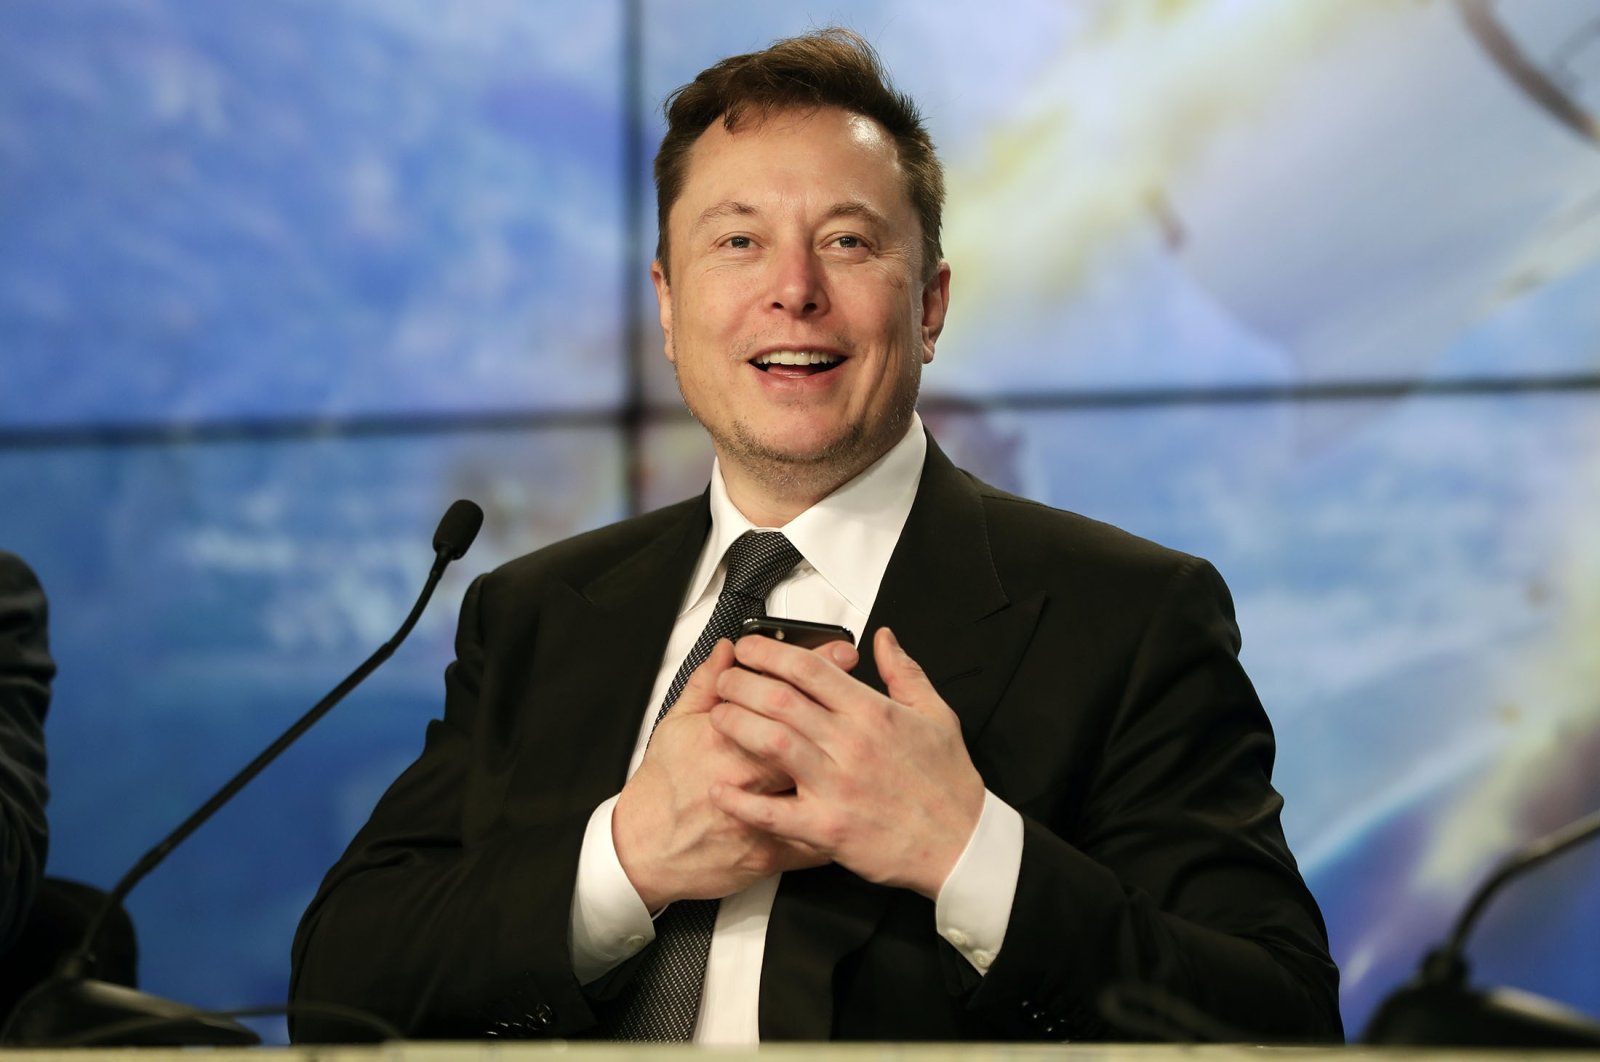 Elon Musk speaks during a news conference after a Falcon 9 SpaceX rocket test flight at the Kennedy Space Center in Cape Canaveral, Florida, U.S., Jan. 19, 2020. (AP Photo)